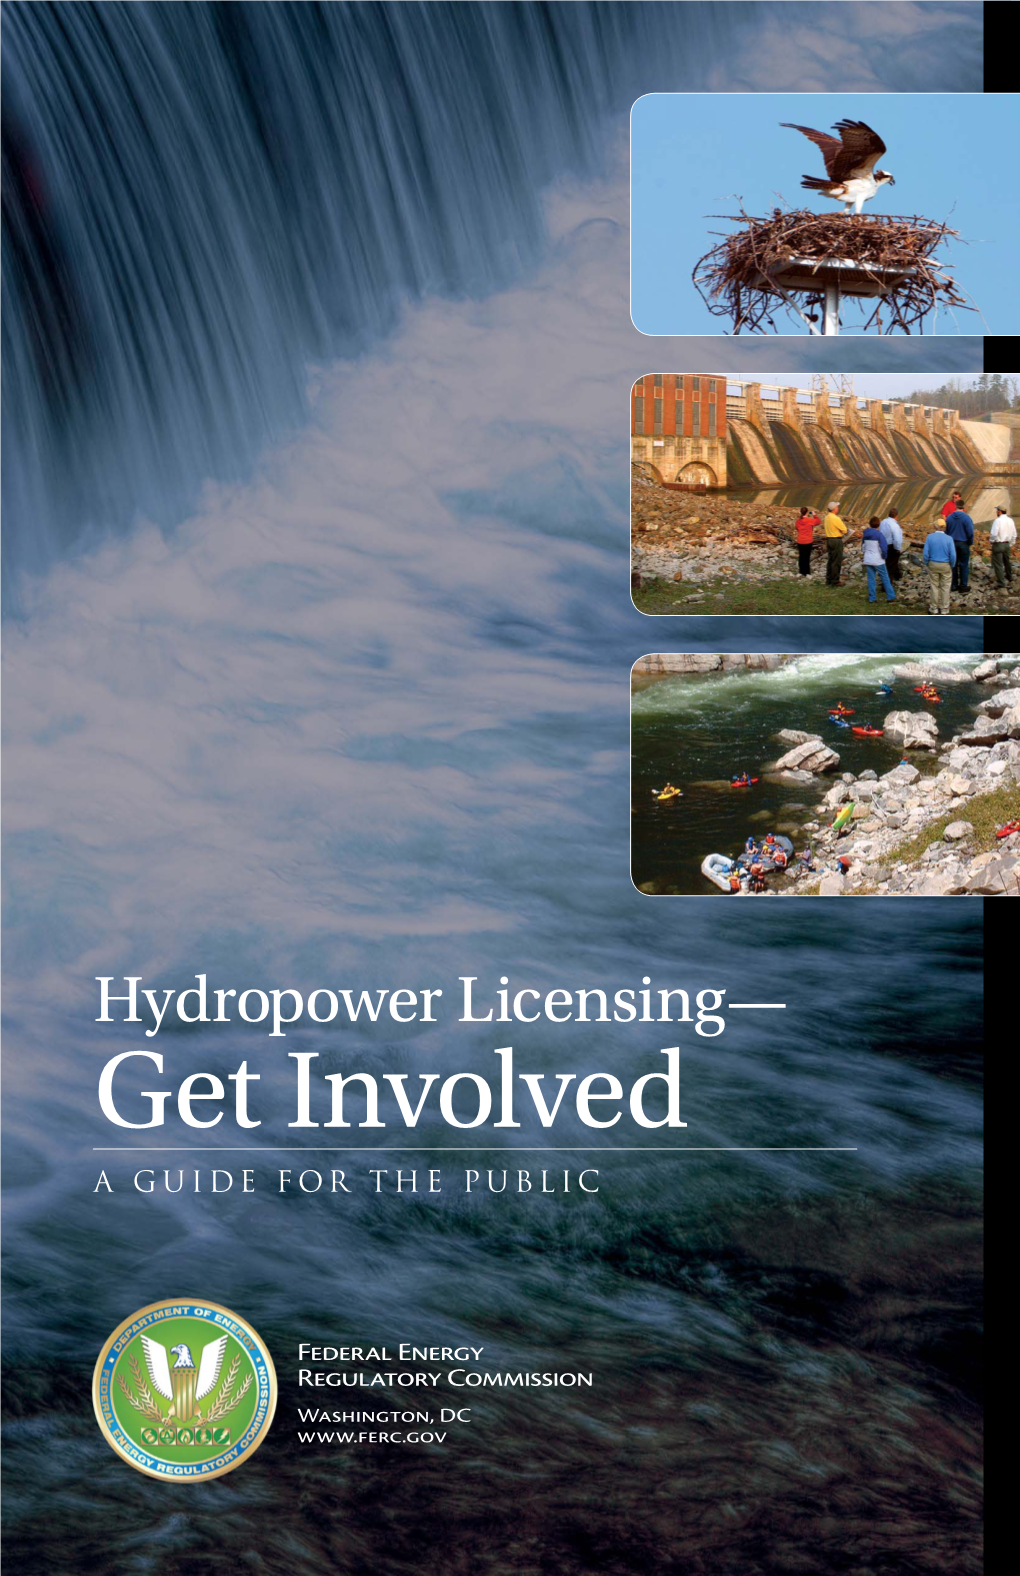 Hydropower Licensing – How to Get Involved Brochure